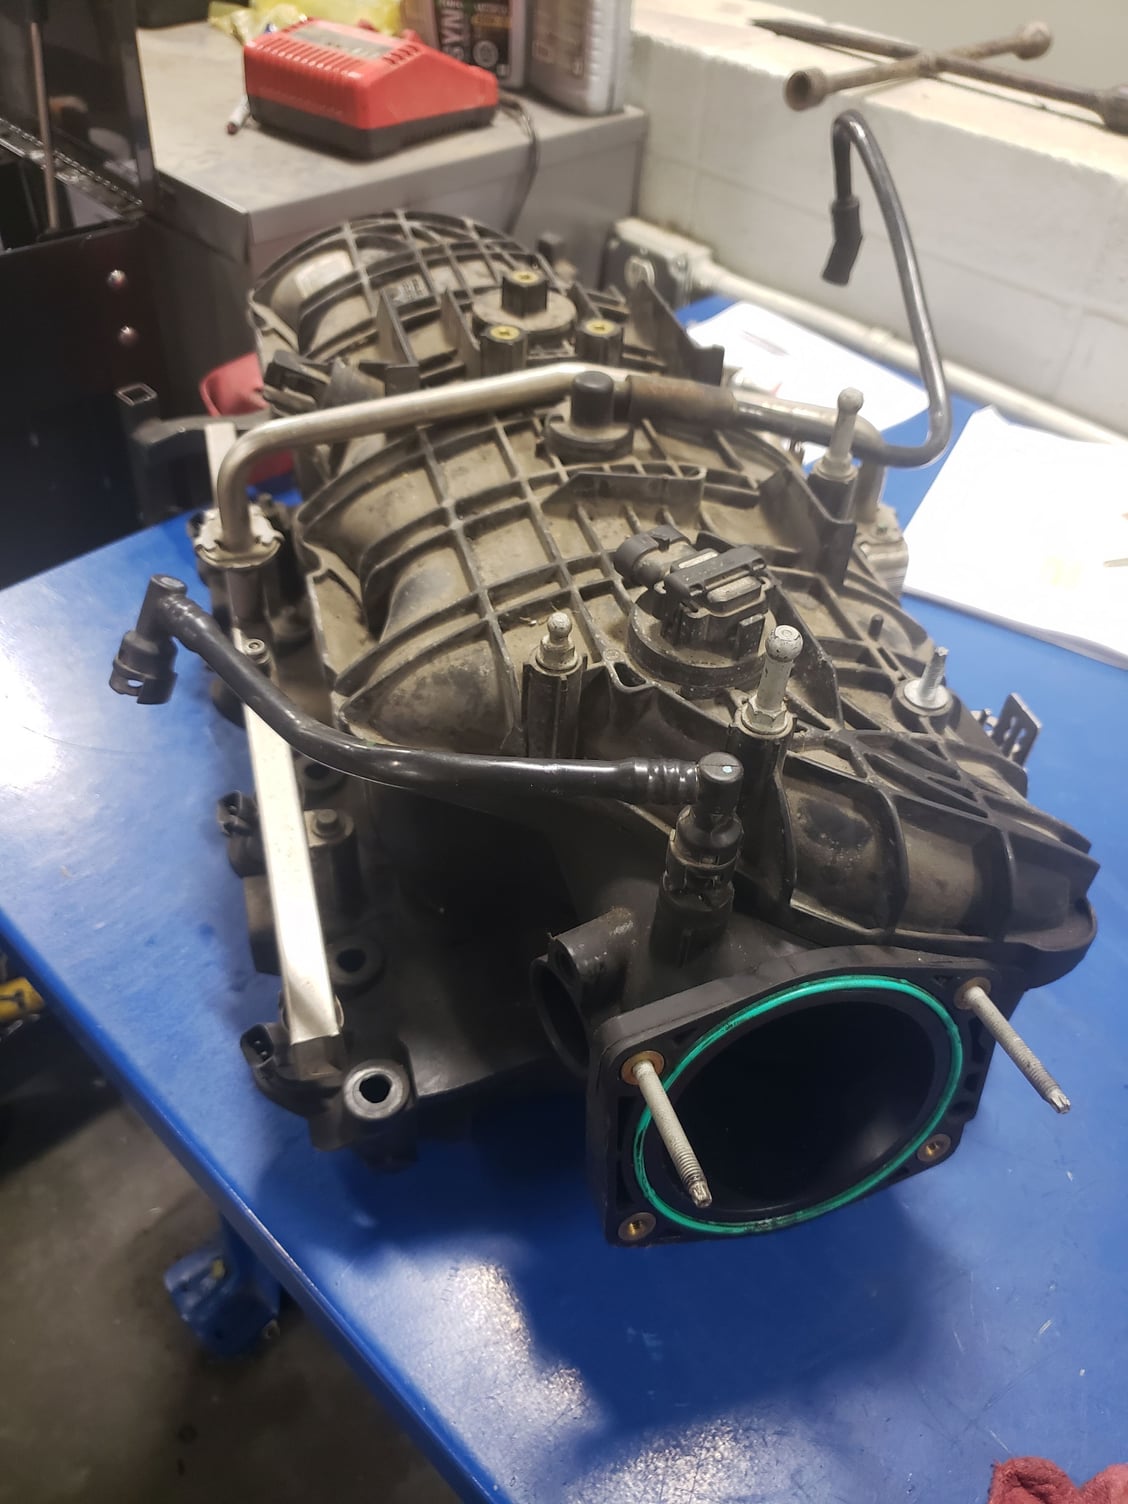  - WTT TBSS Intake for LS6 - Mansfield, TX 76063, United States